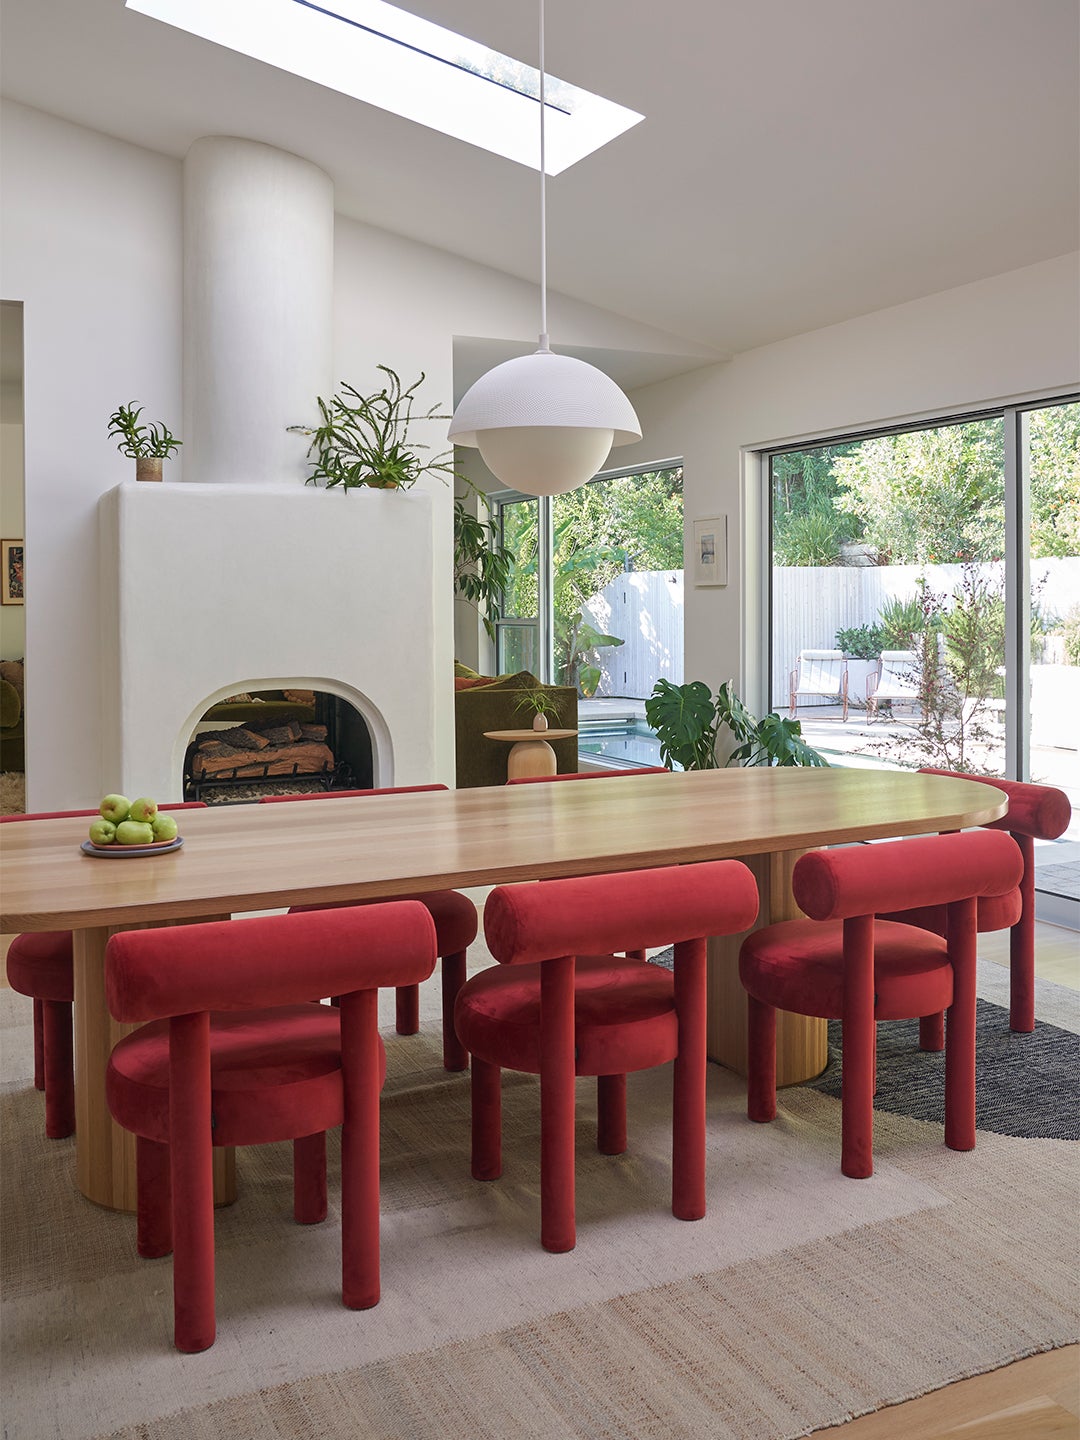 The Kitchen Island in This L.A. Home Reminds Its Music-Supervisor Owner of Her DJing Days